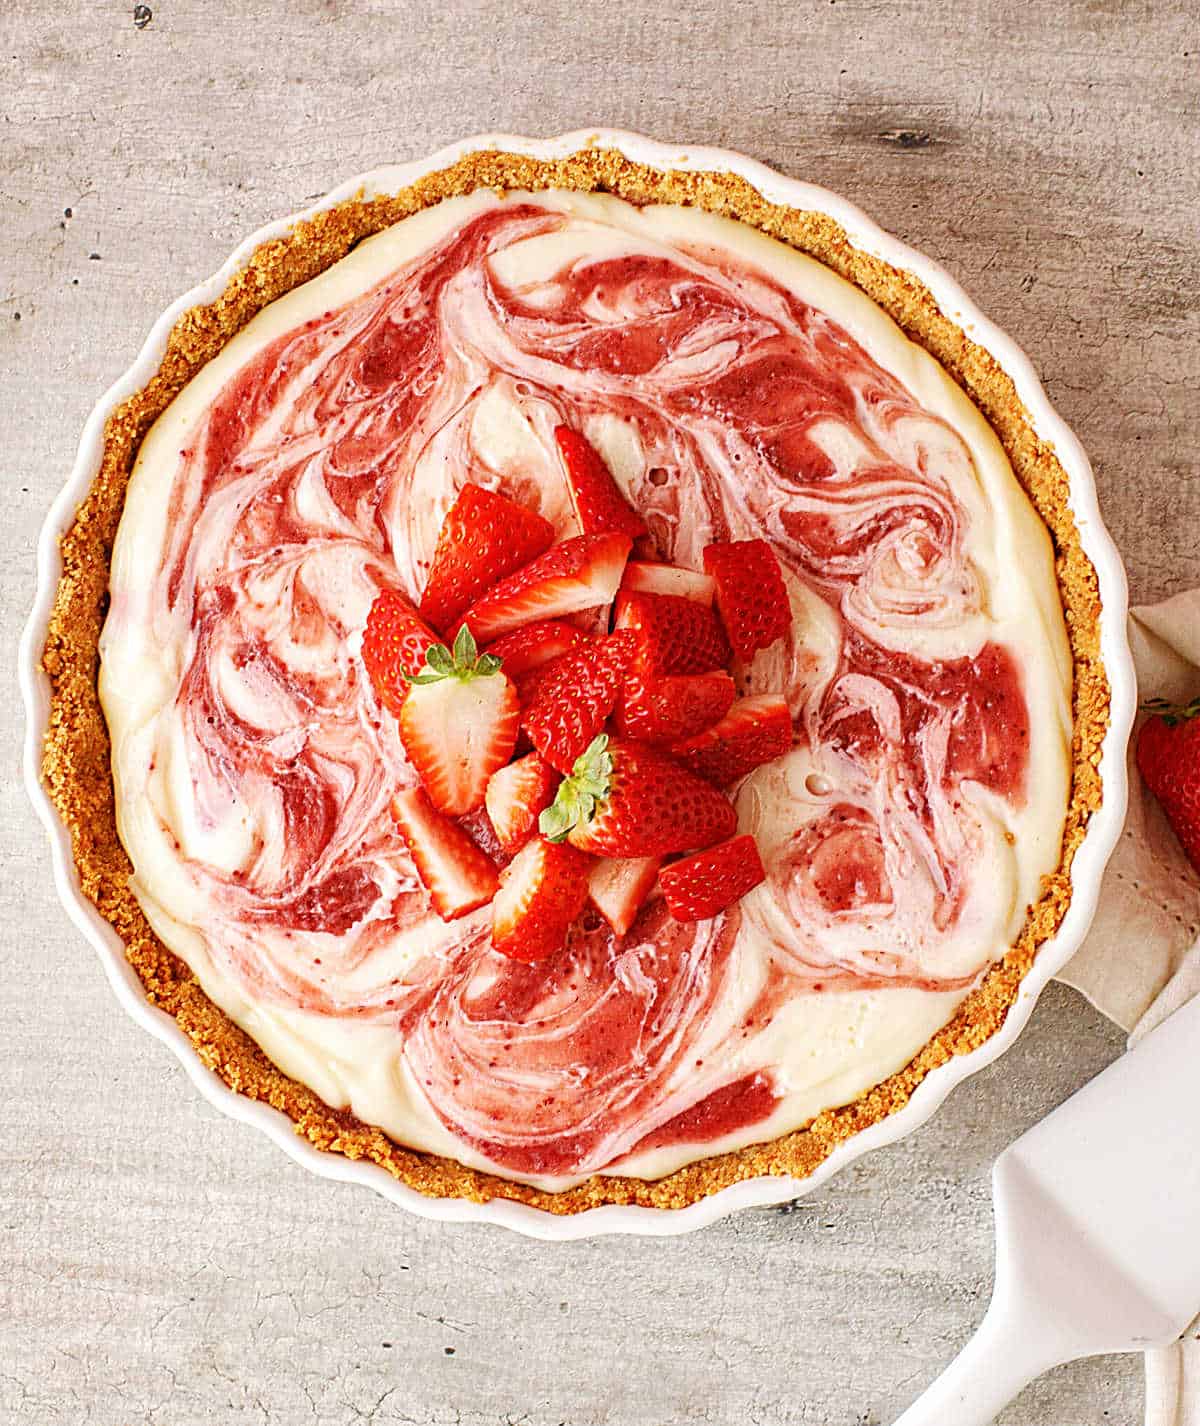 Top view of whole straberry swirl pie on a white dish on a grey surface.